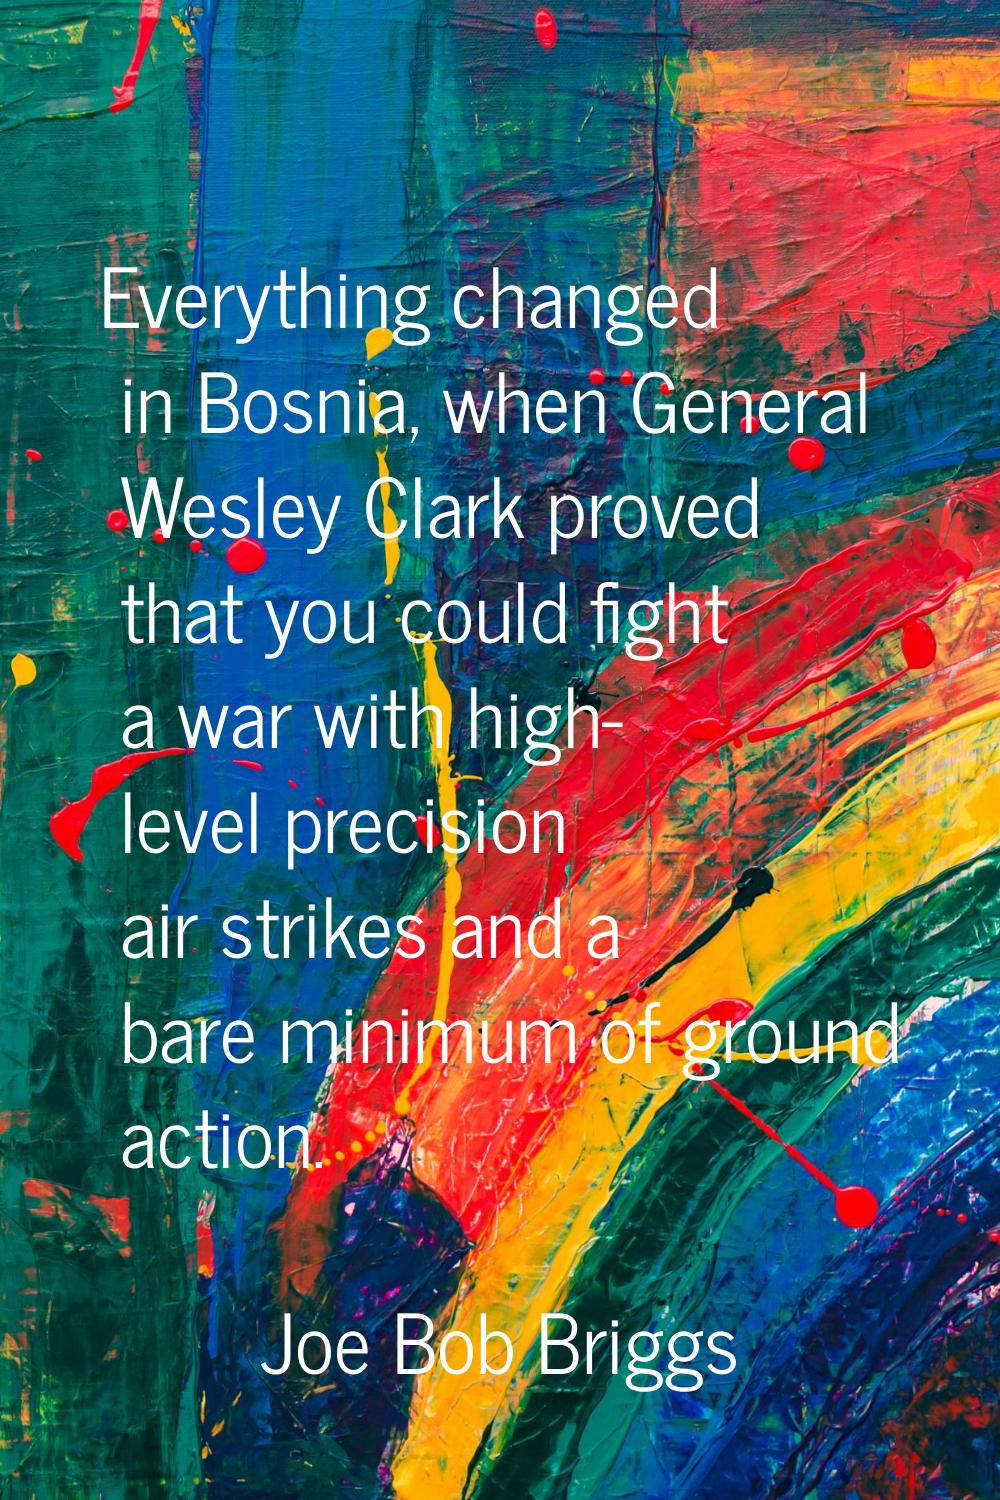 Everything changed in Bosnia, when General Wesley Clark proved that you could fight a war with high